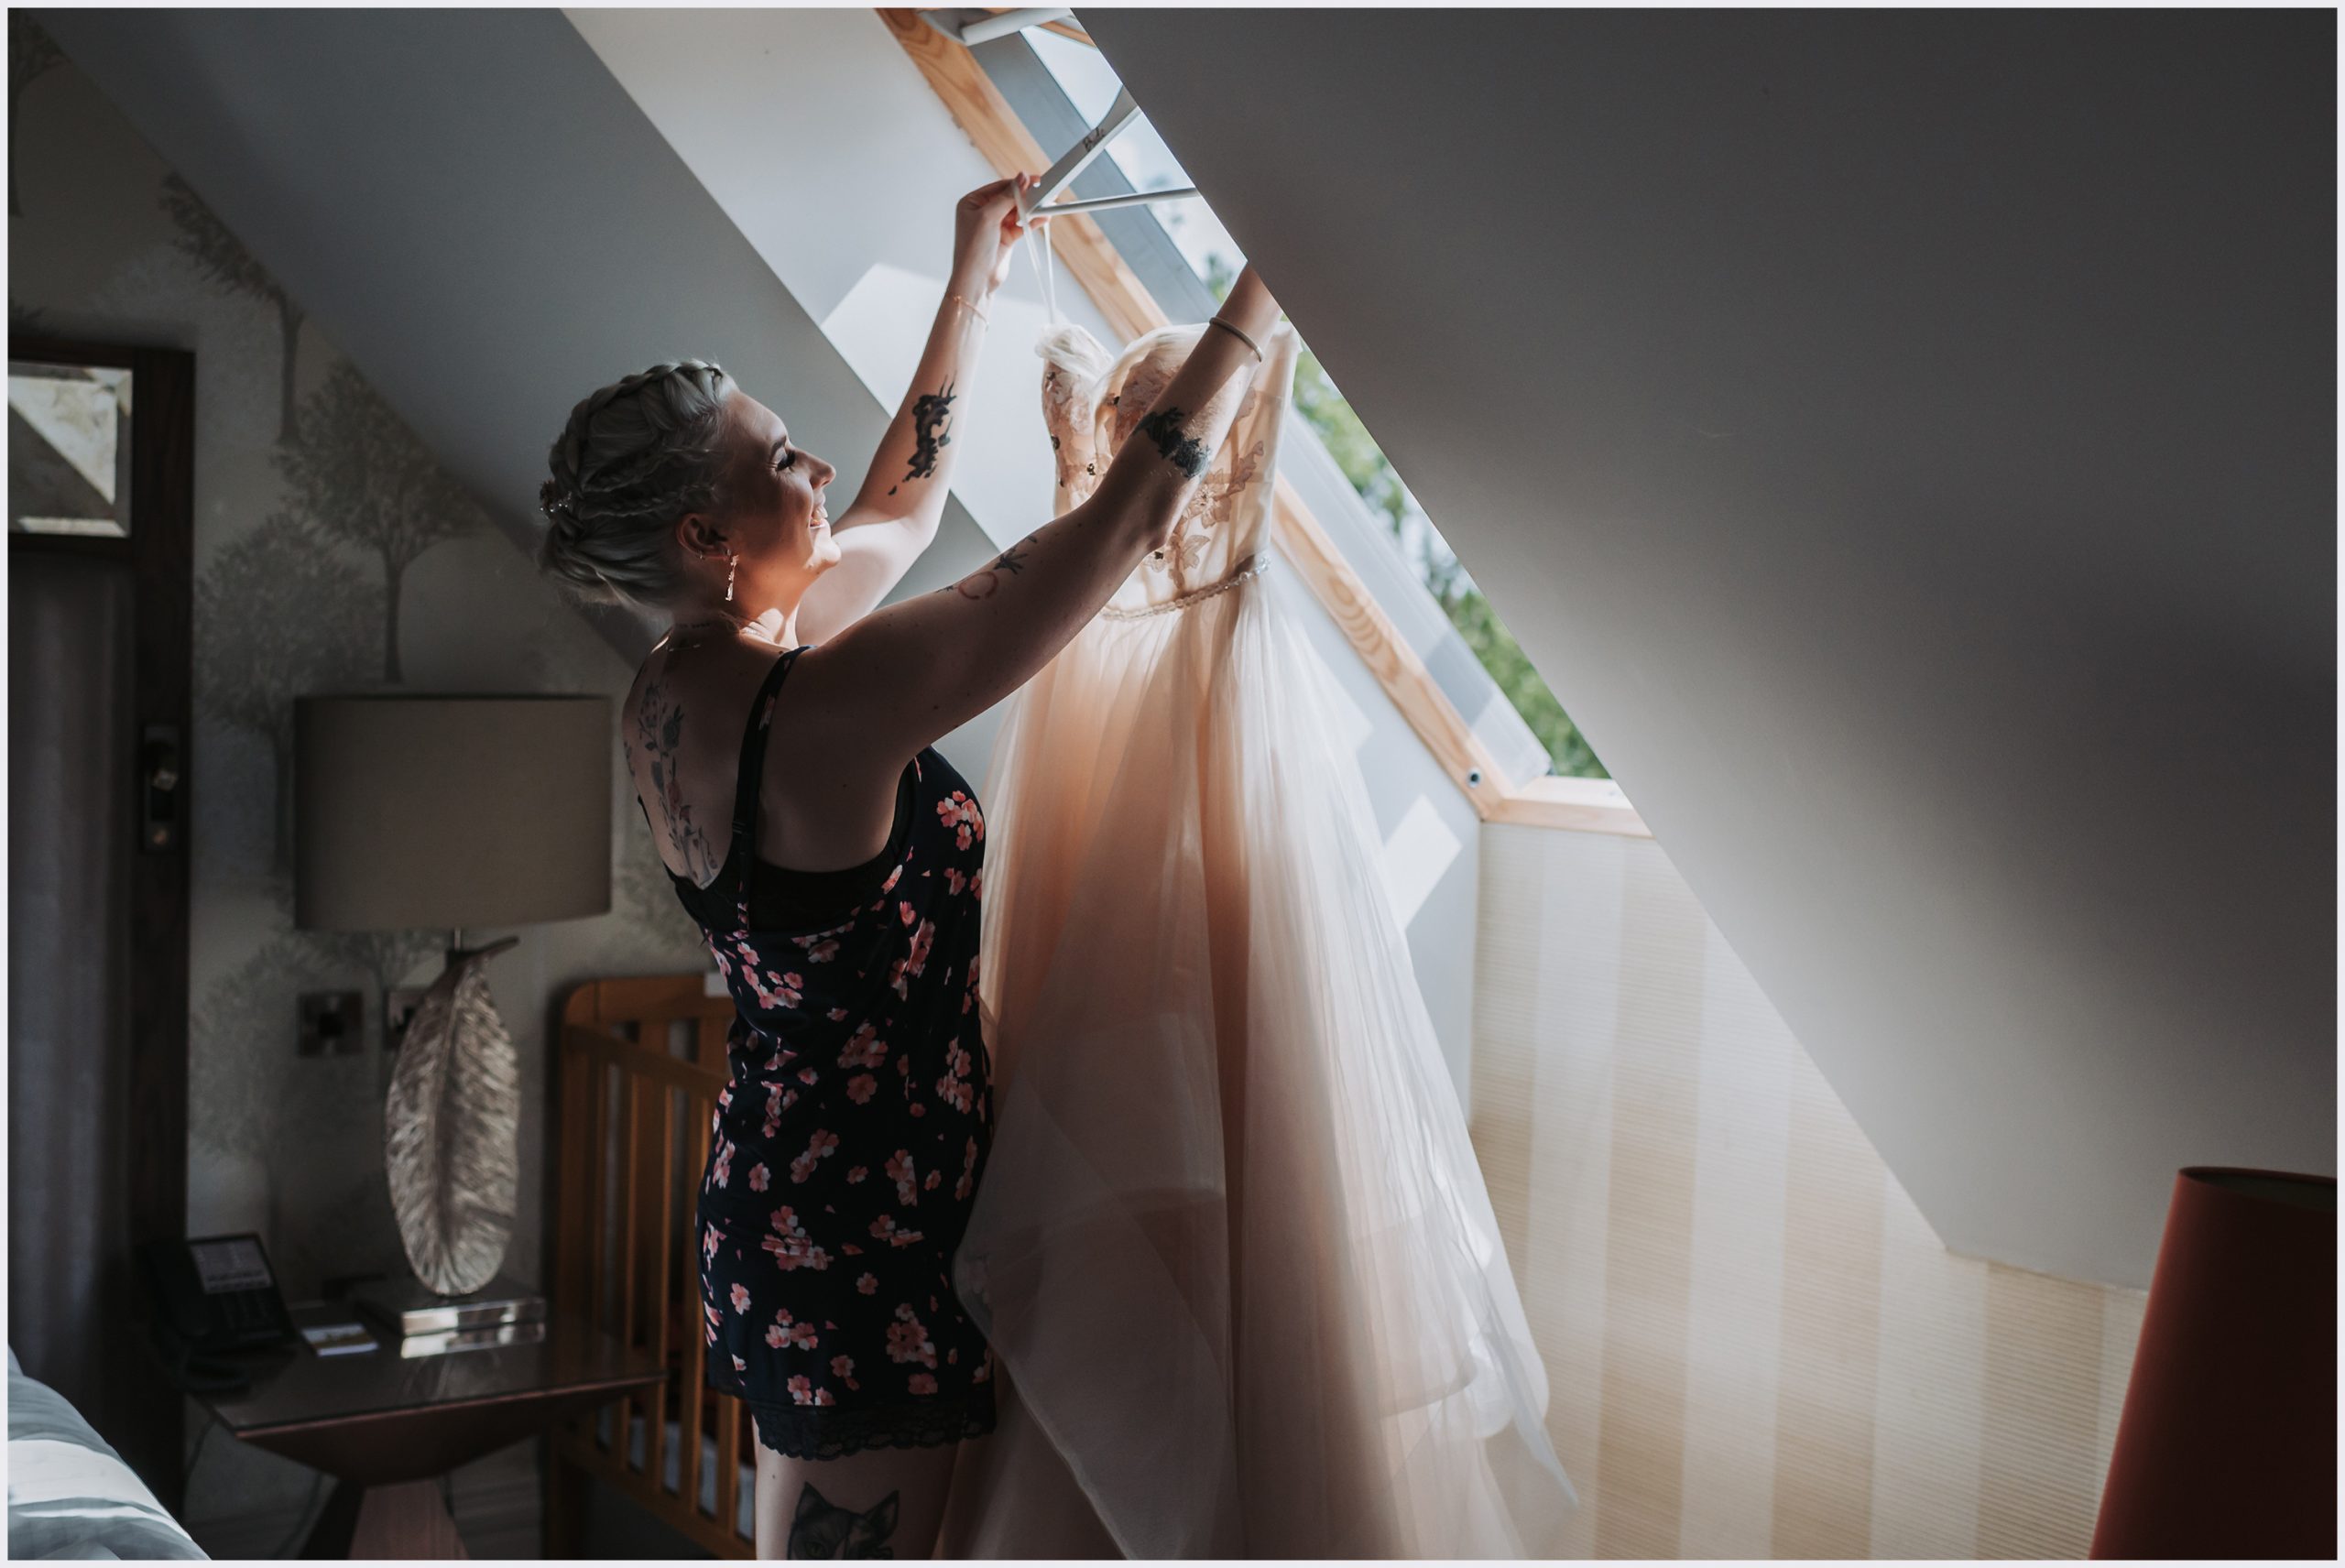 A beautiful bride lifts her wedding dress of the hanger as sun shines through the wondow on the morning of her wedding.  The bride is smiling and full of happiness as she gets ready.  Image captured by Helena Jayne Photography.  A north Wales based wedding photographer